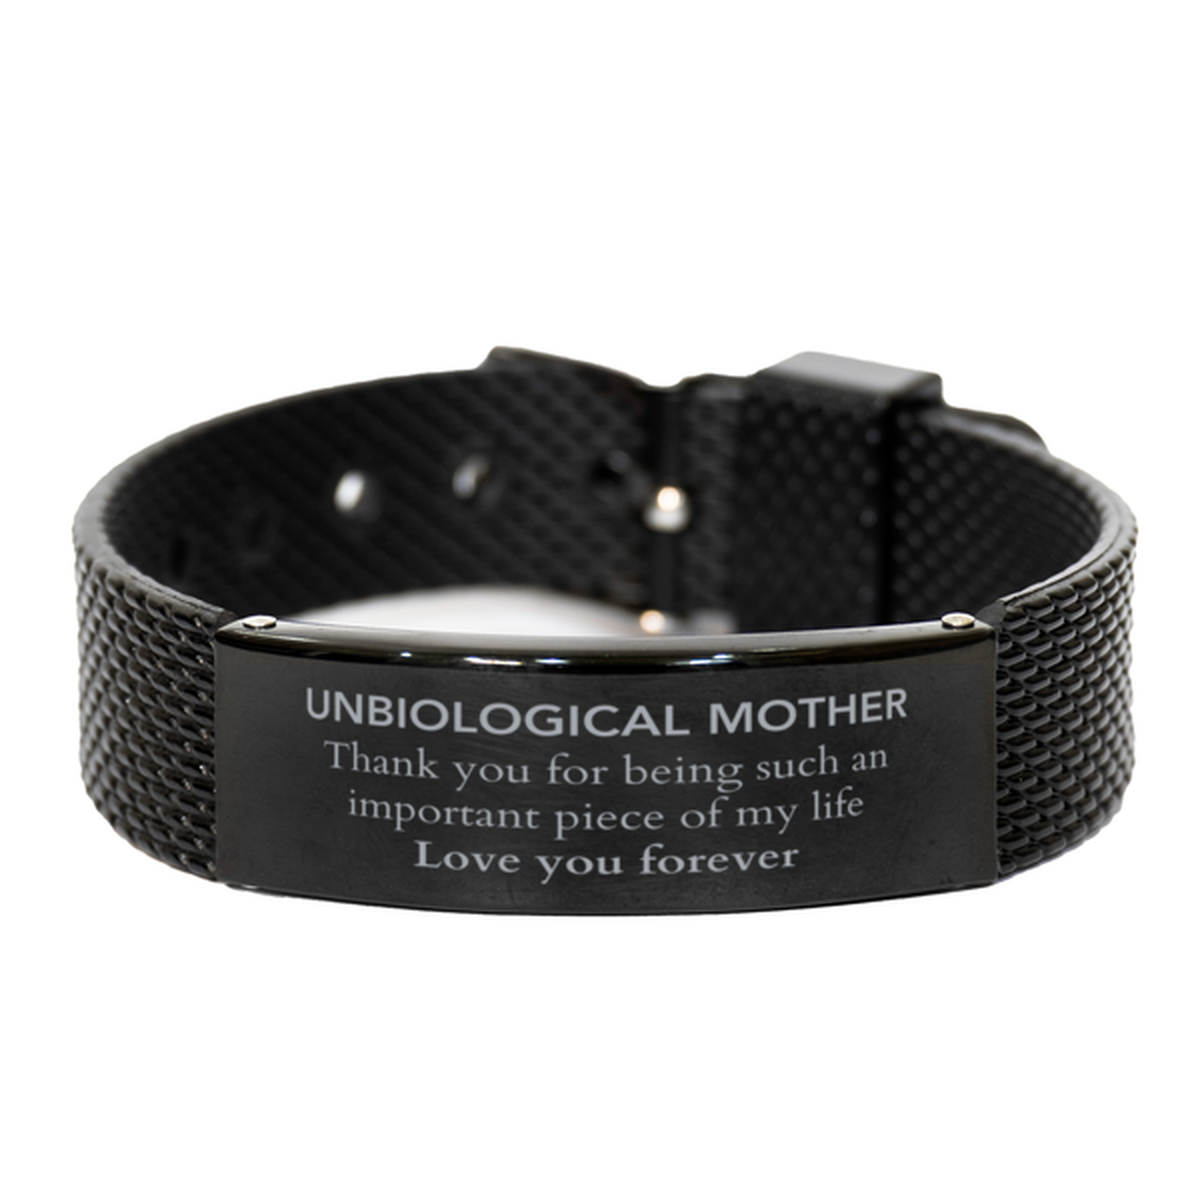 Appropriate Unbiological Mother Black Shark Mesh Bracelet Epic Birthday Gifts for Unbiological Mother Thank you for being such an important piece of my life Unbiological Mother Christmas Mothers Fathers Day